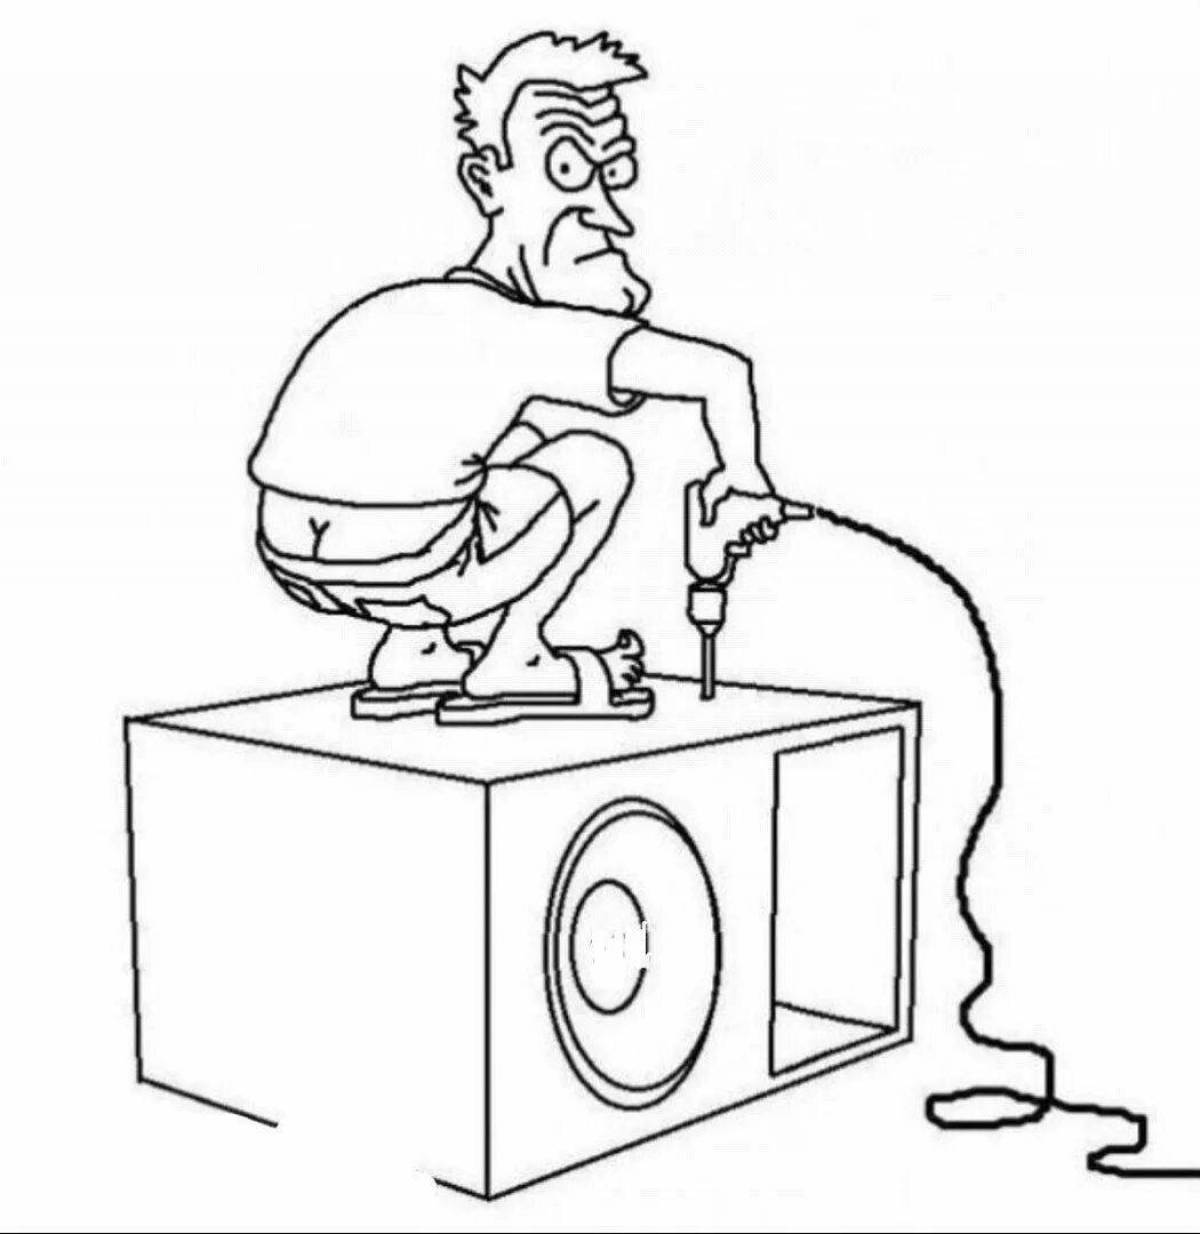 Luxury subwoofer coloring page